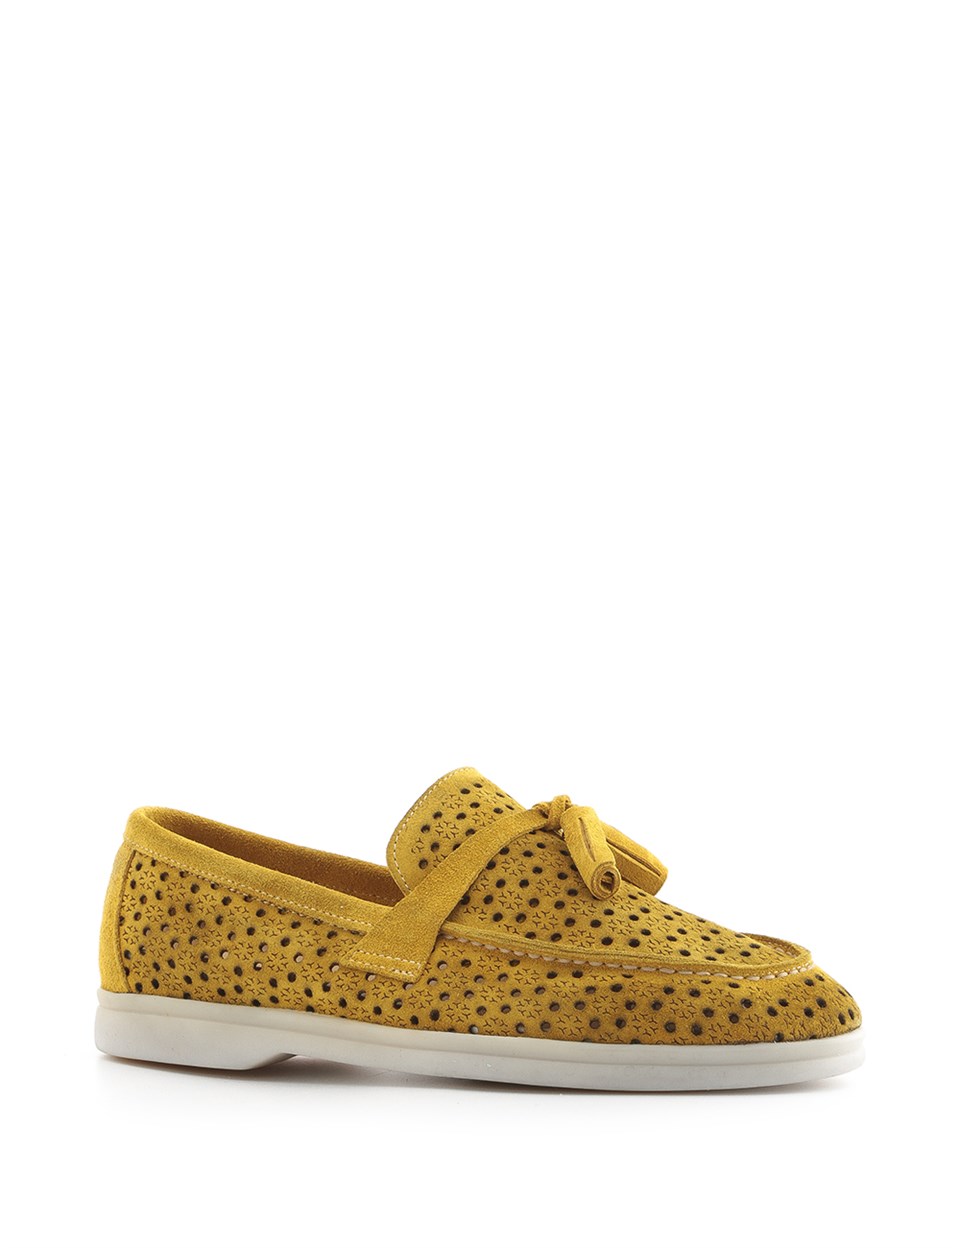 yellow suede loafers womens